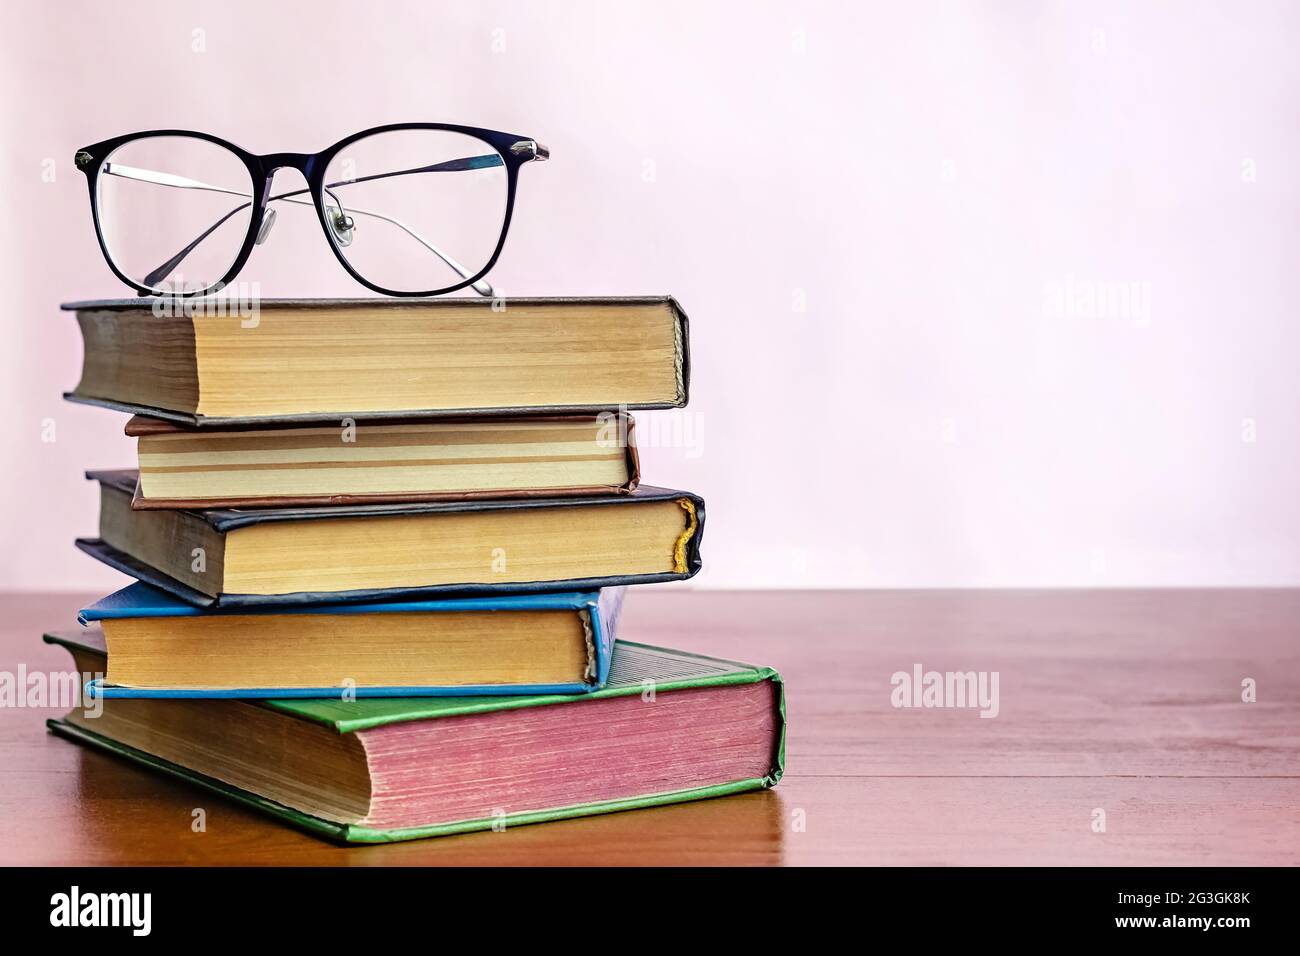 ovn Indbildsk bid Stack of books with reading glasses on top Stock Photo - Alamy